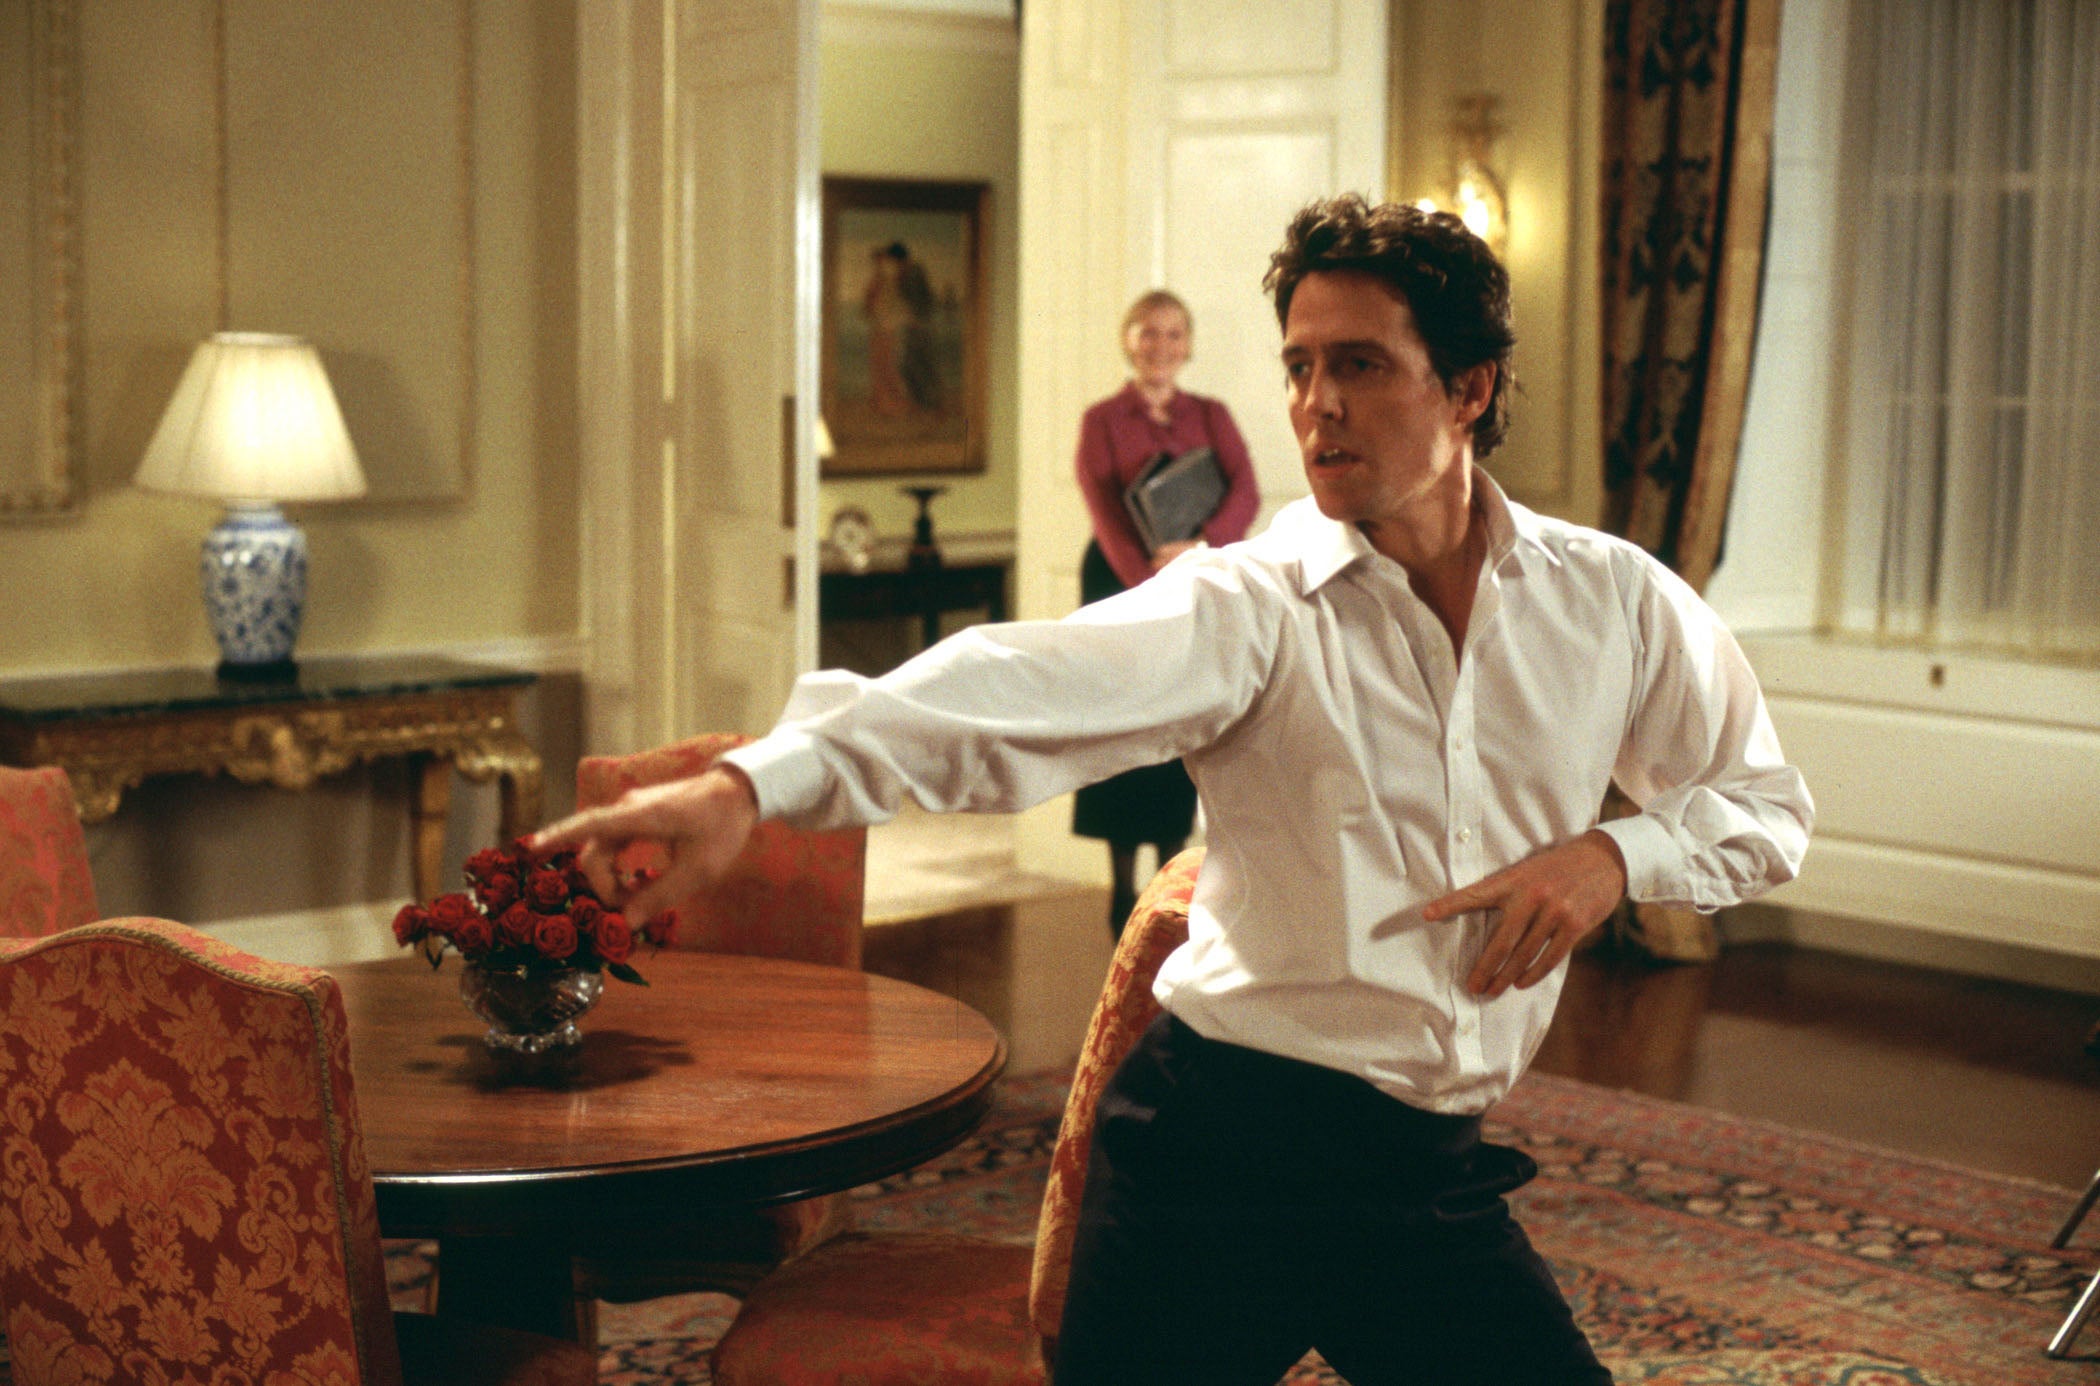 Hugh Grant dances as a fictional PM in ‘Love Actually’